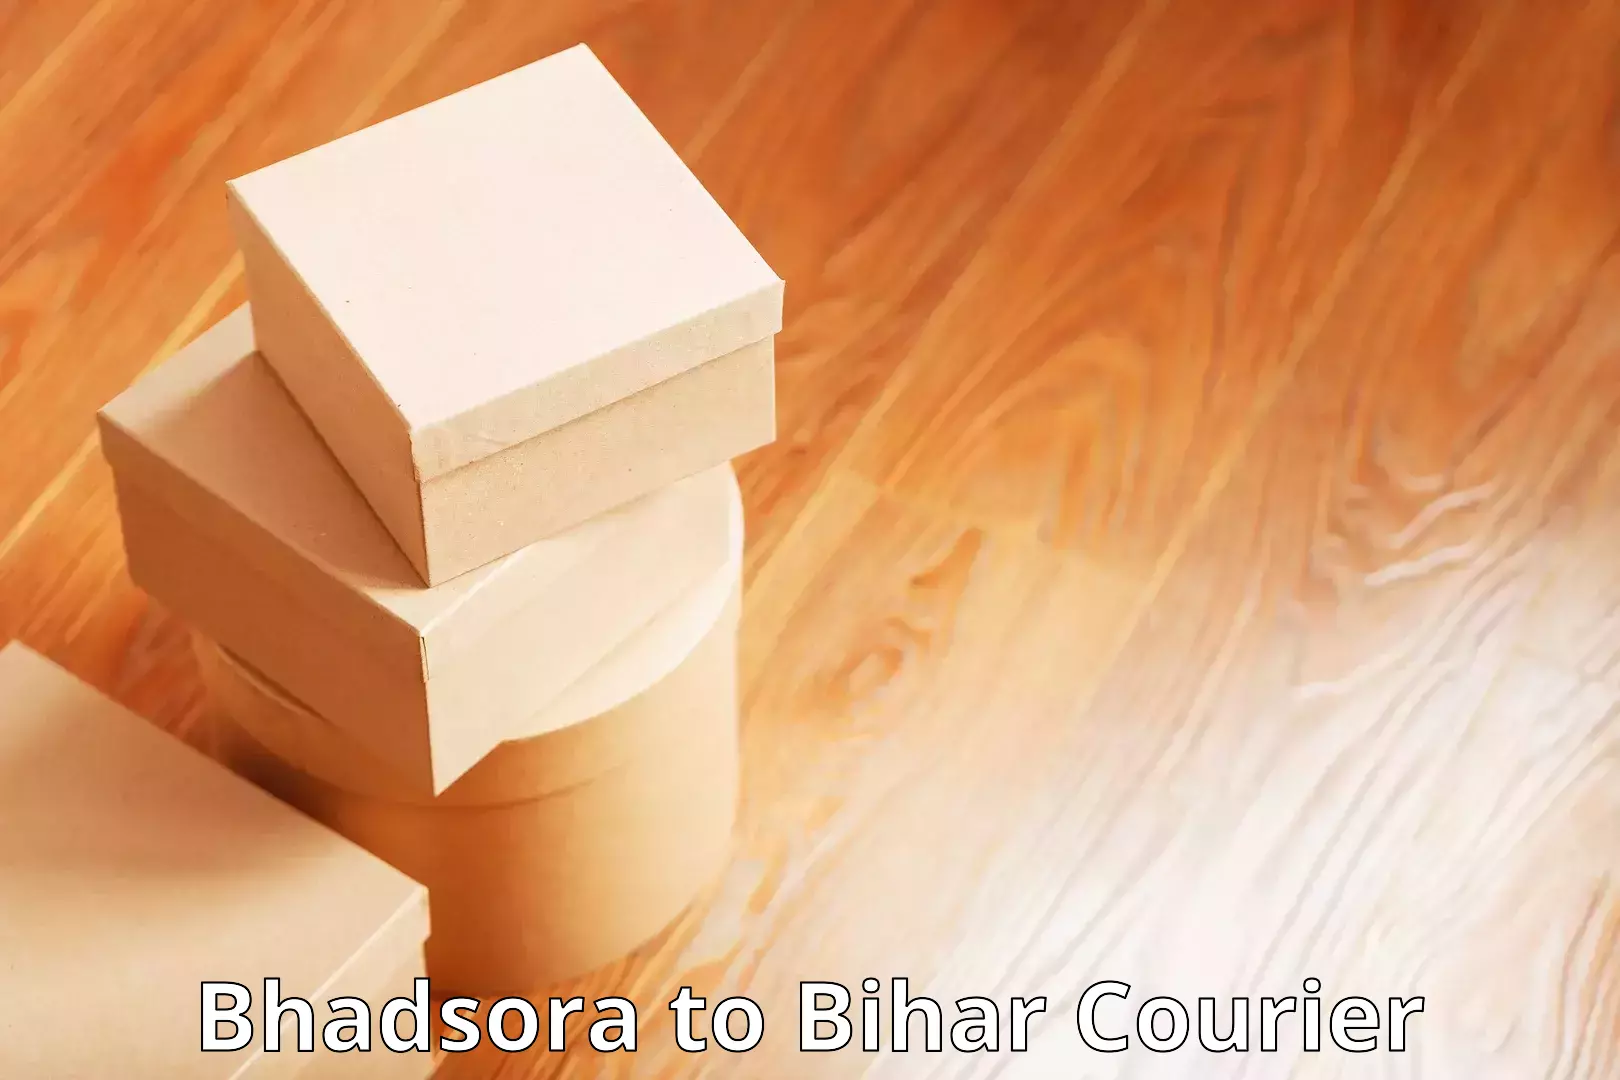 Courier service booking Bhadsora to Chainpur